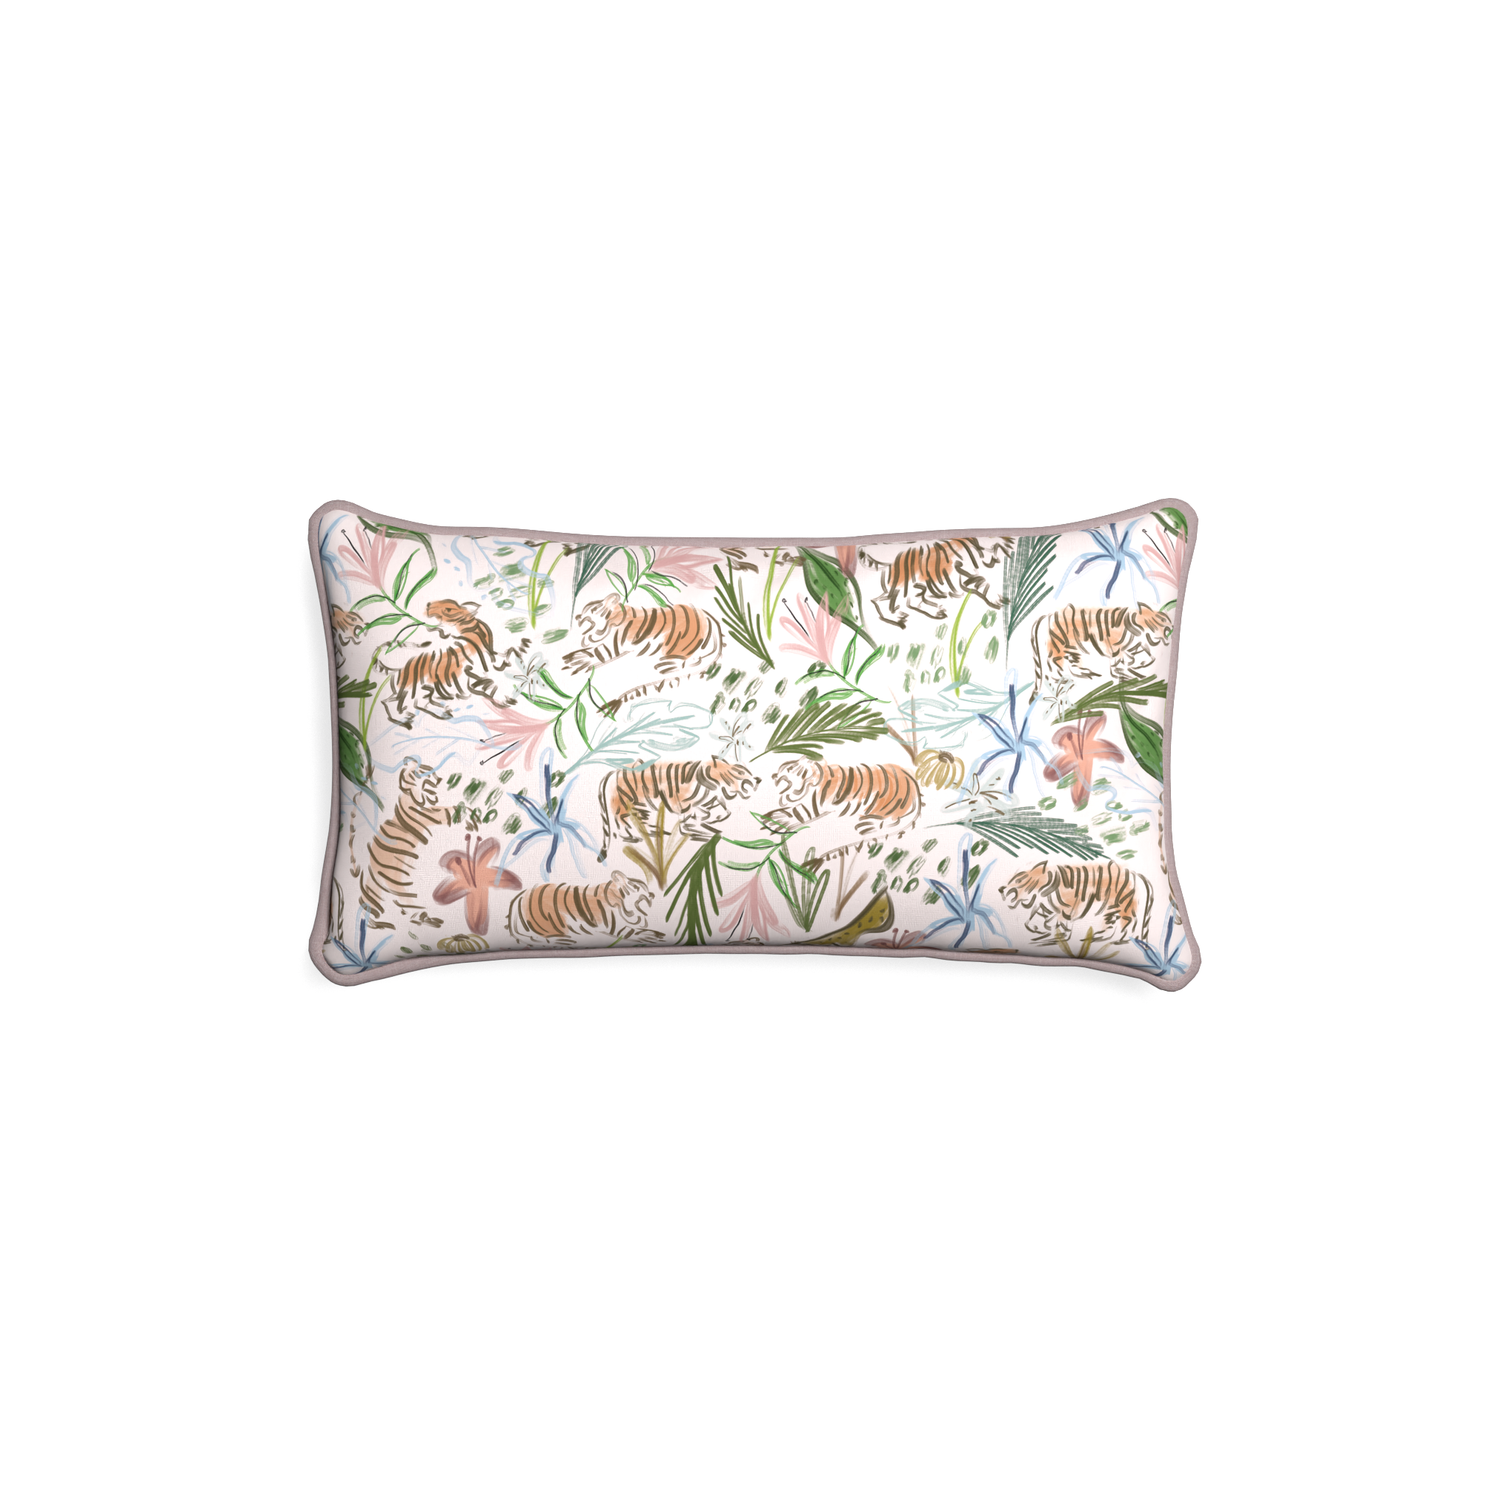 Petite-lumbar frida pink custom pink chinoiserie tigerpillow with orchid piping on white background